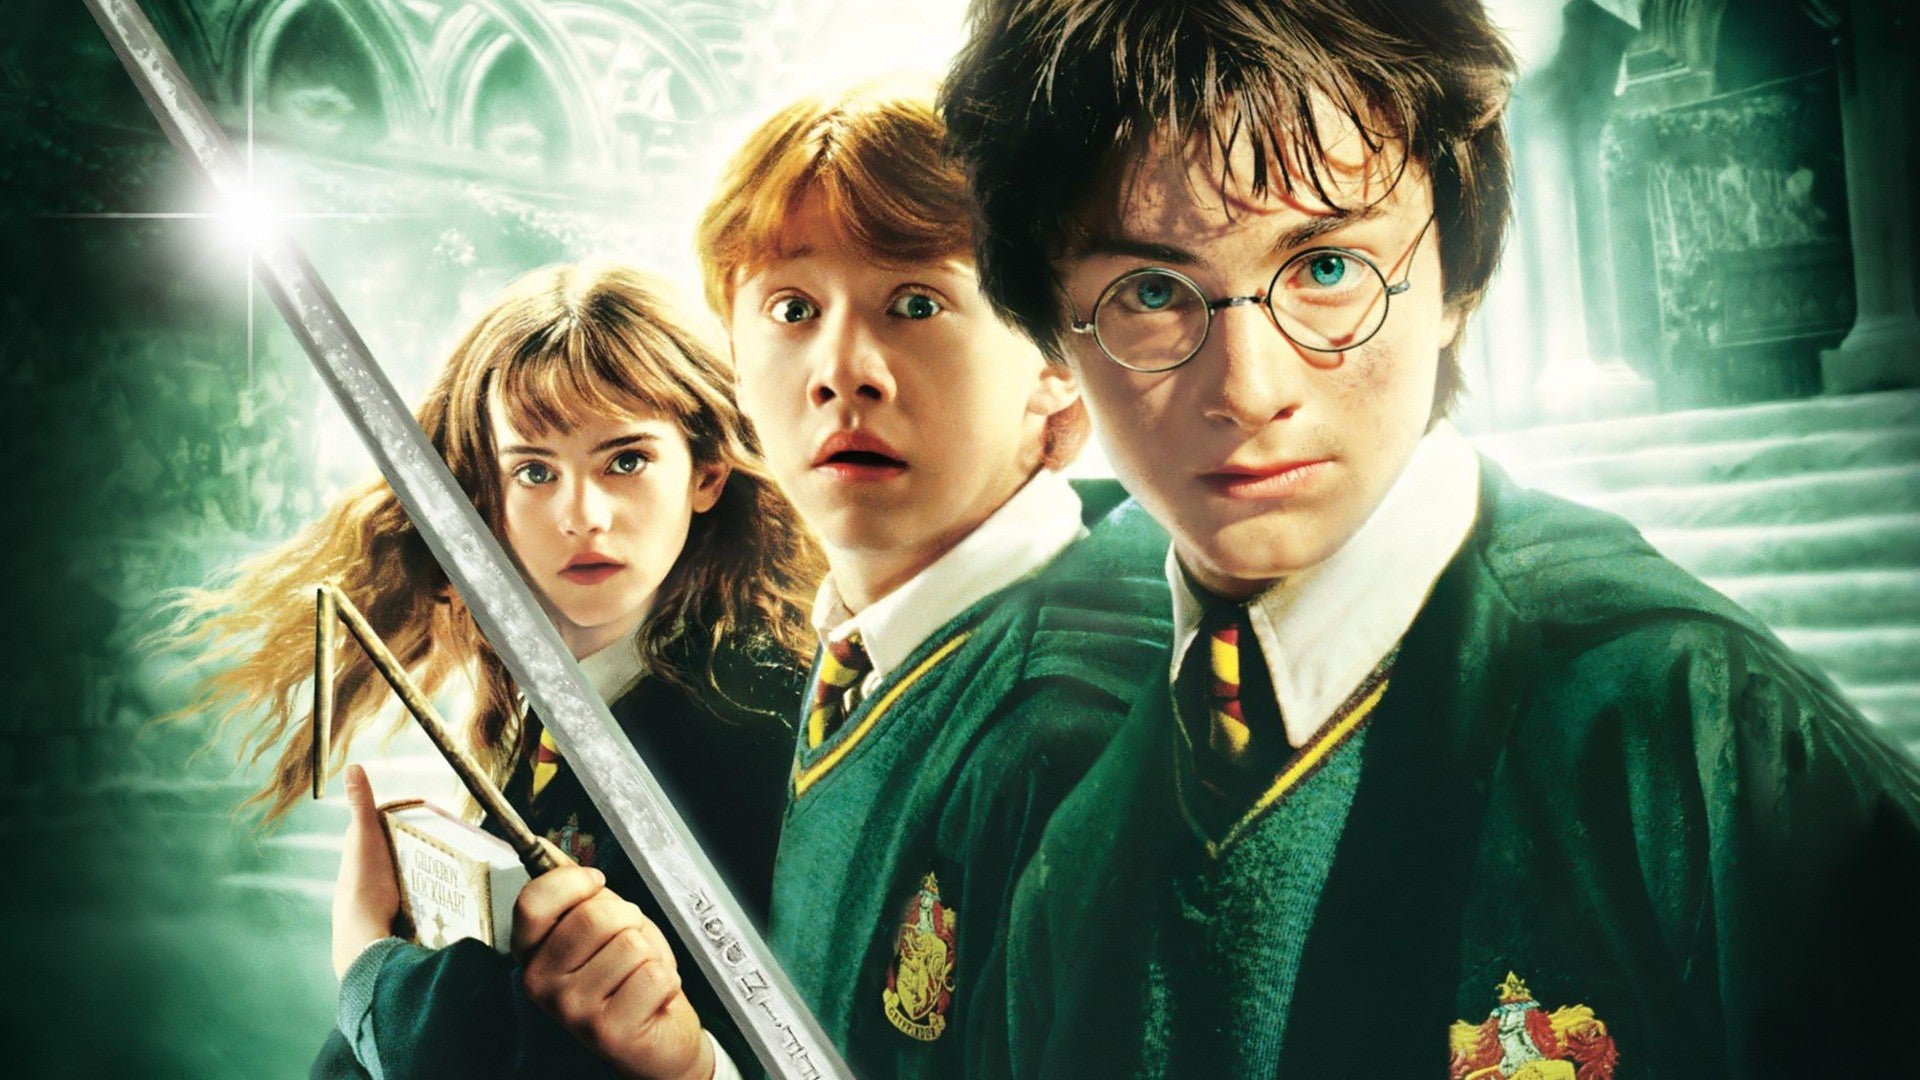 J.K. Rowling's Wizarding World 9-Film Collection